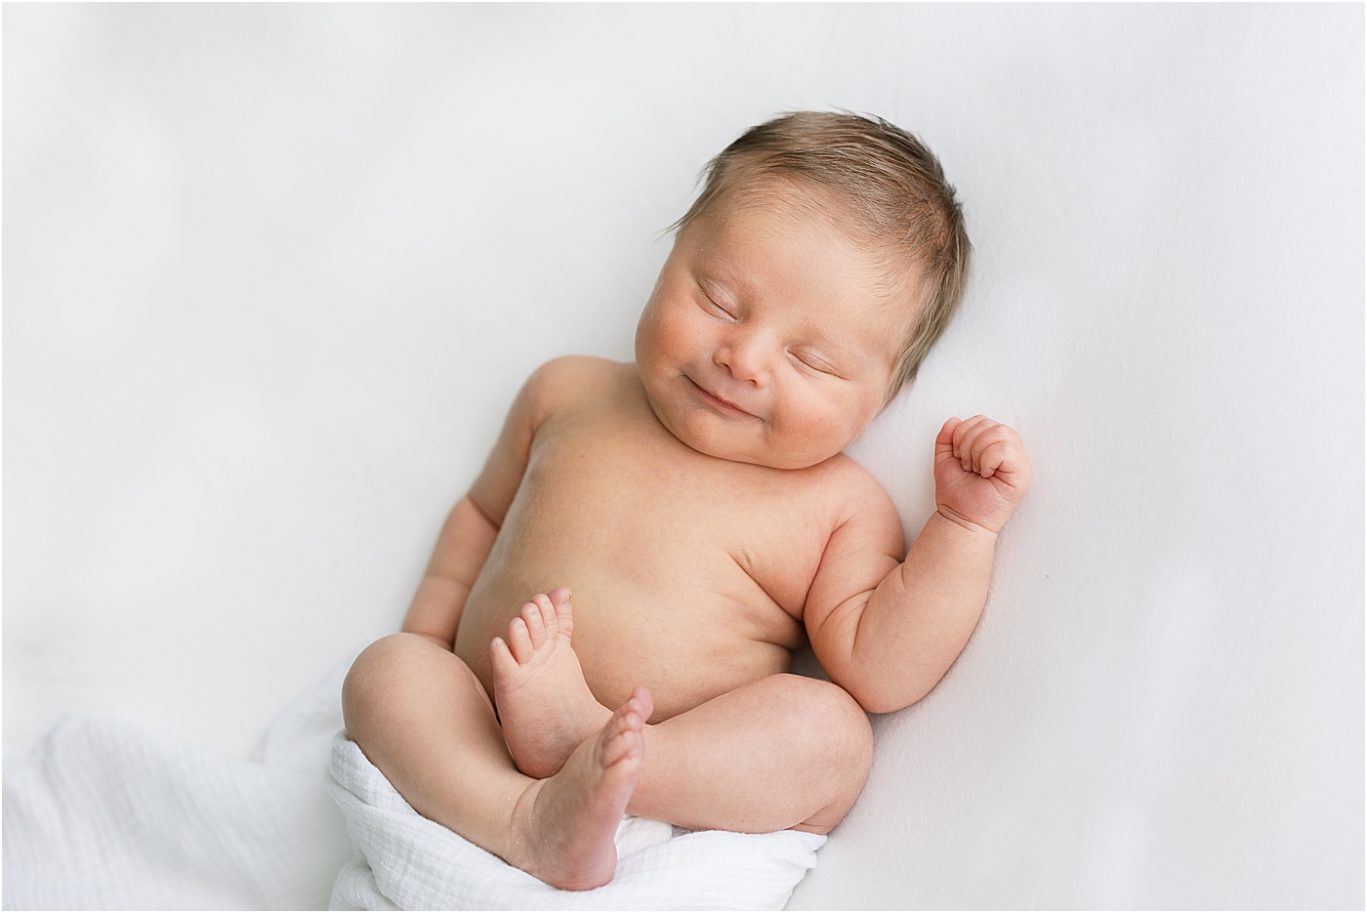 Baby boy smiling during newborn session. Photo by Lindsay Konopa Photography.